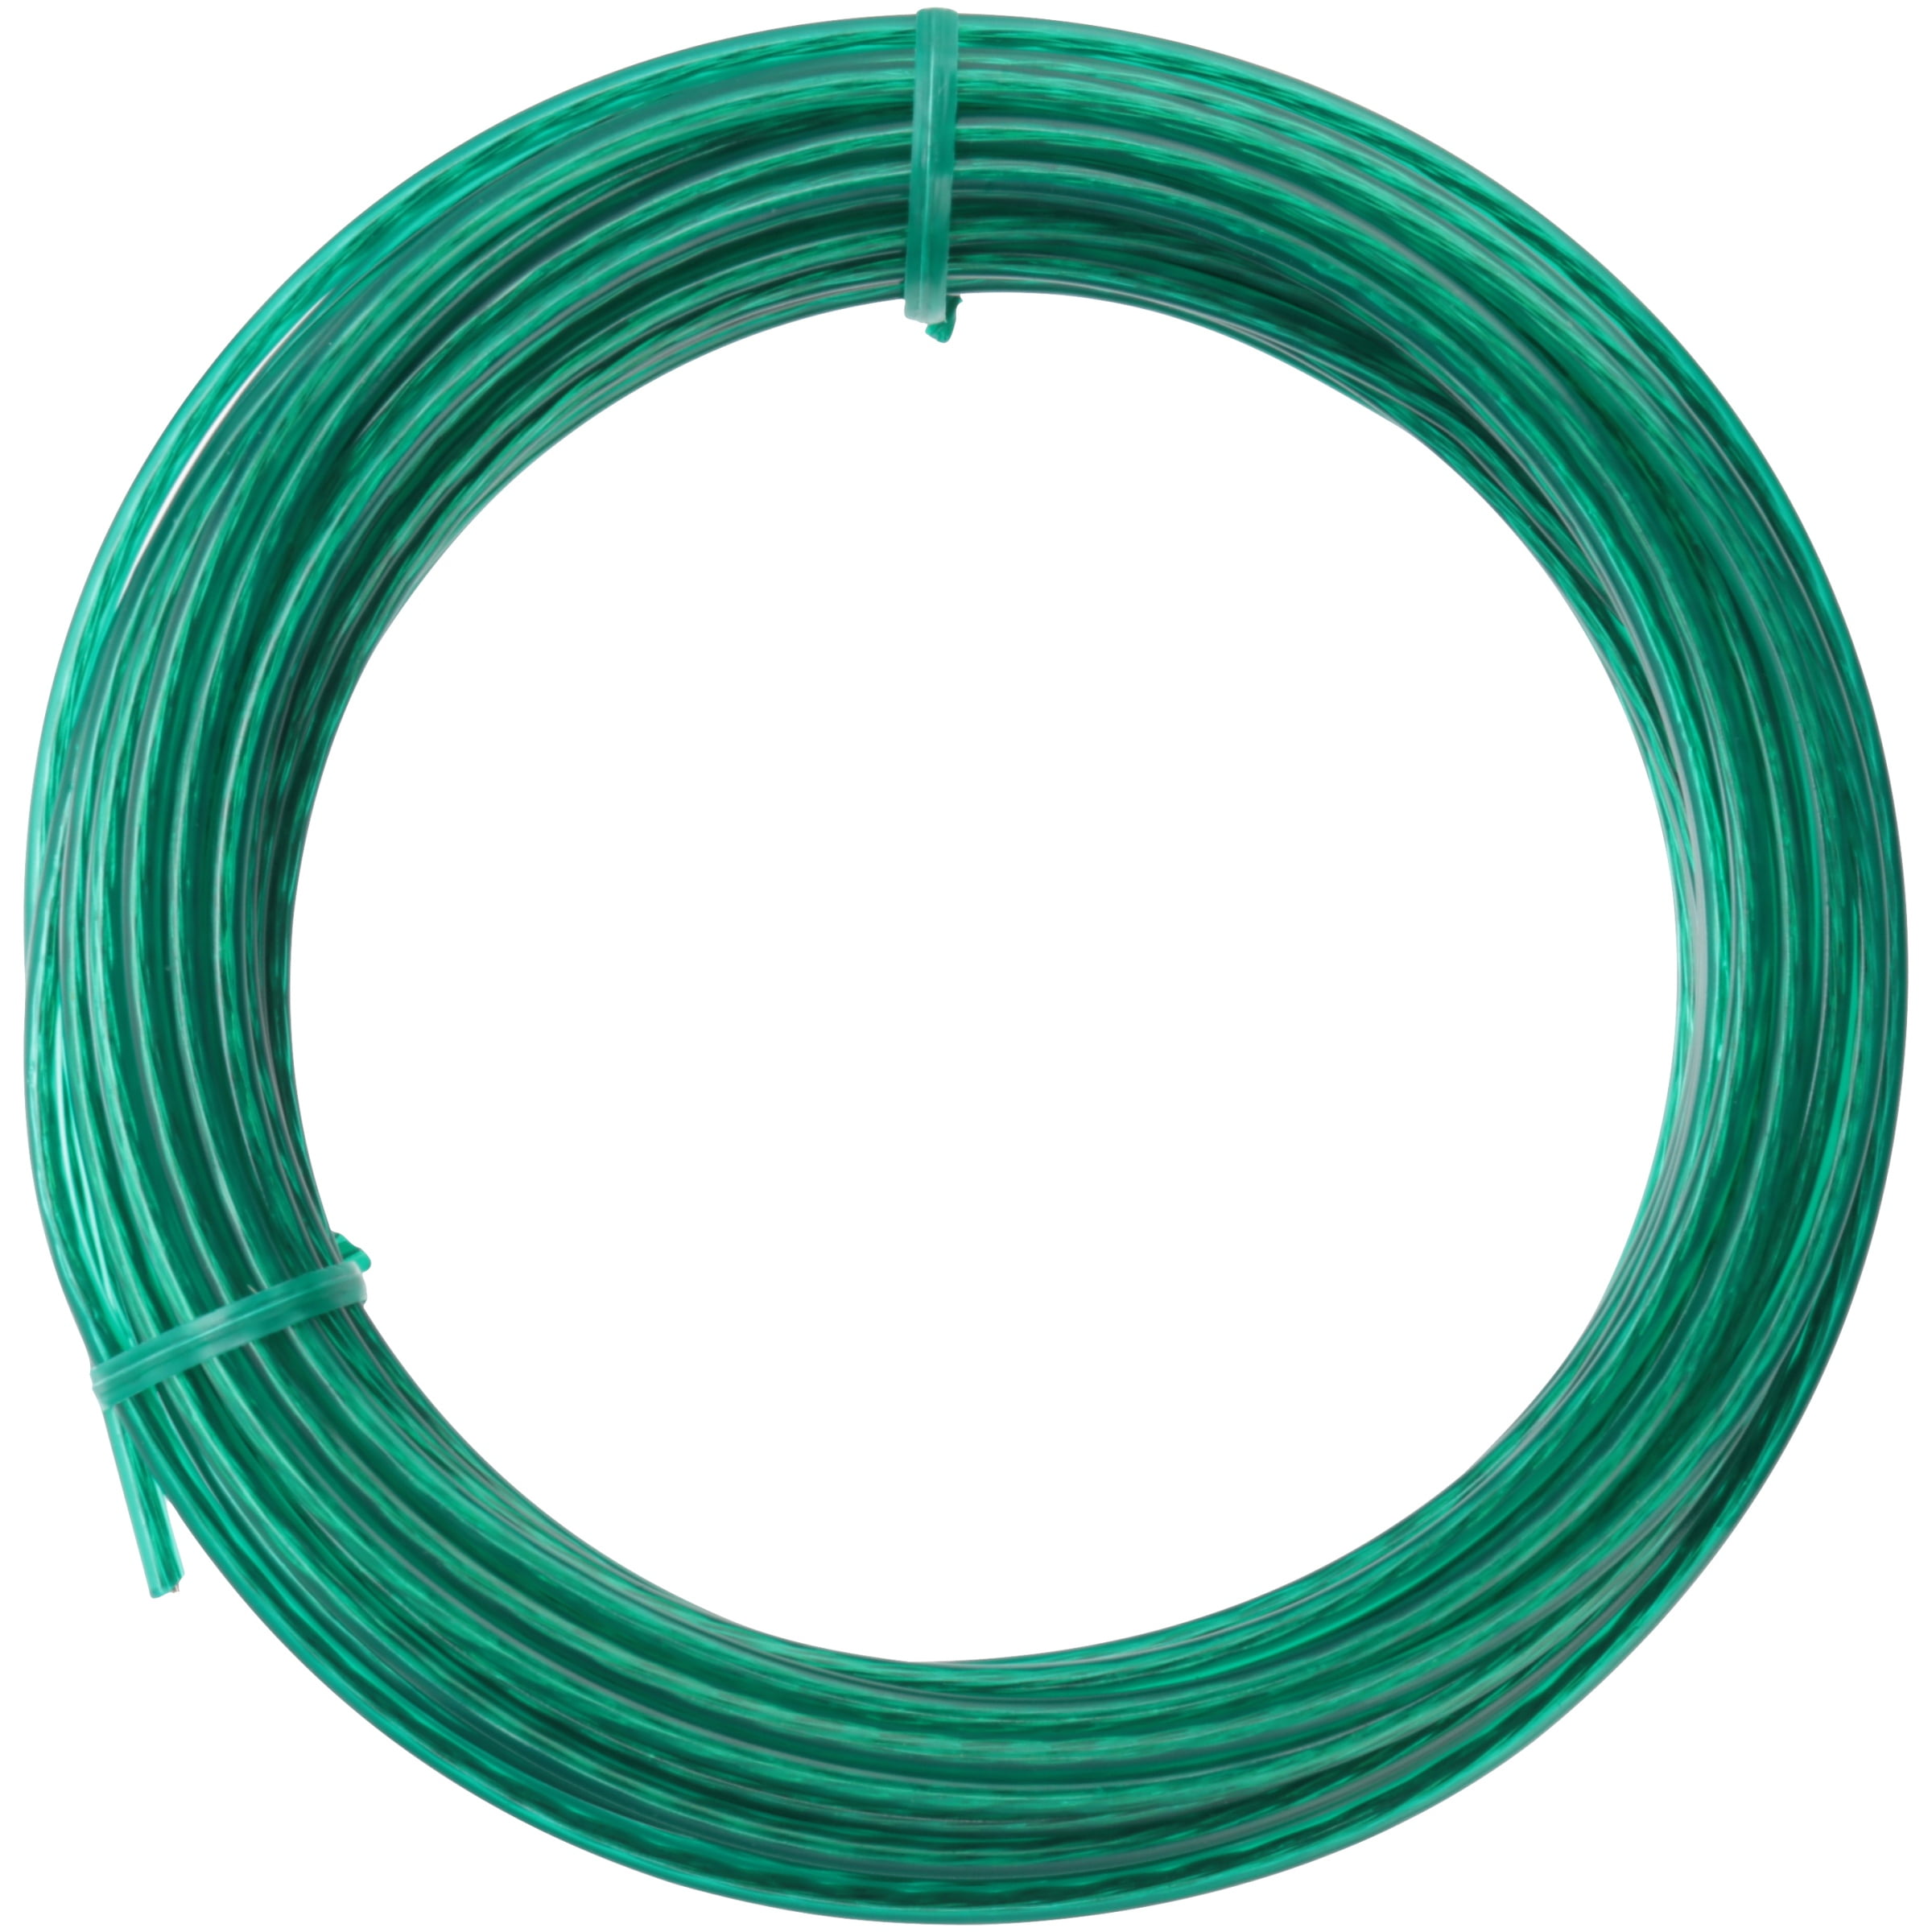 Green Plastic Coated Washing Line 14.5 Metres Durable Wire Centred Clothesline 